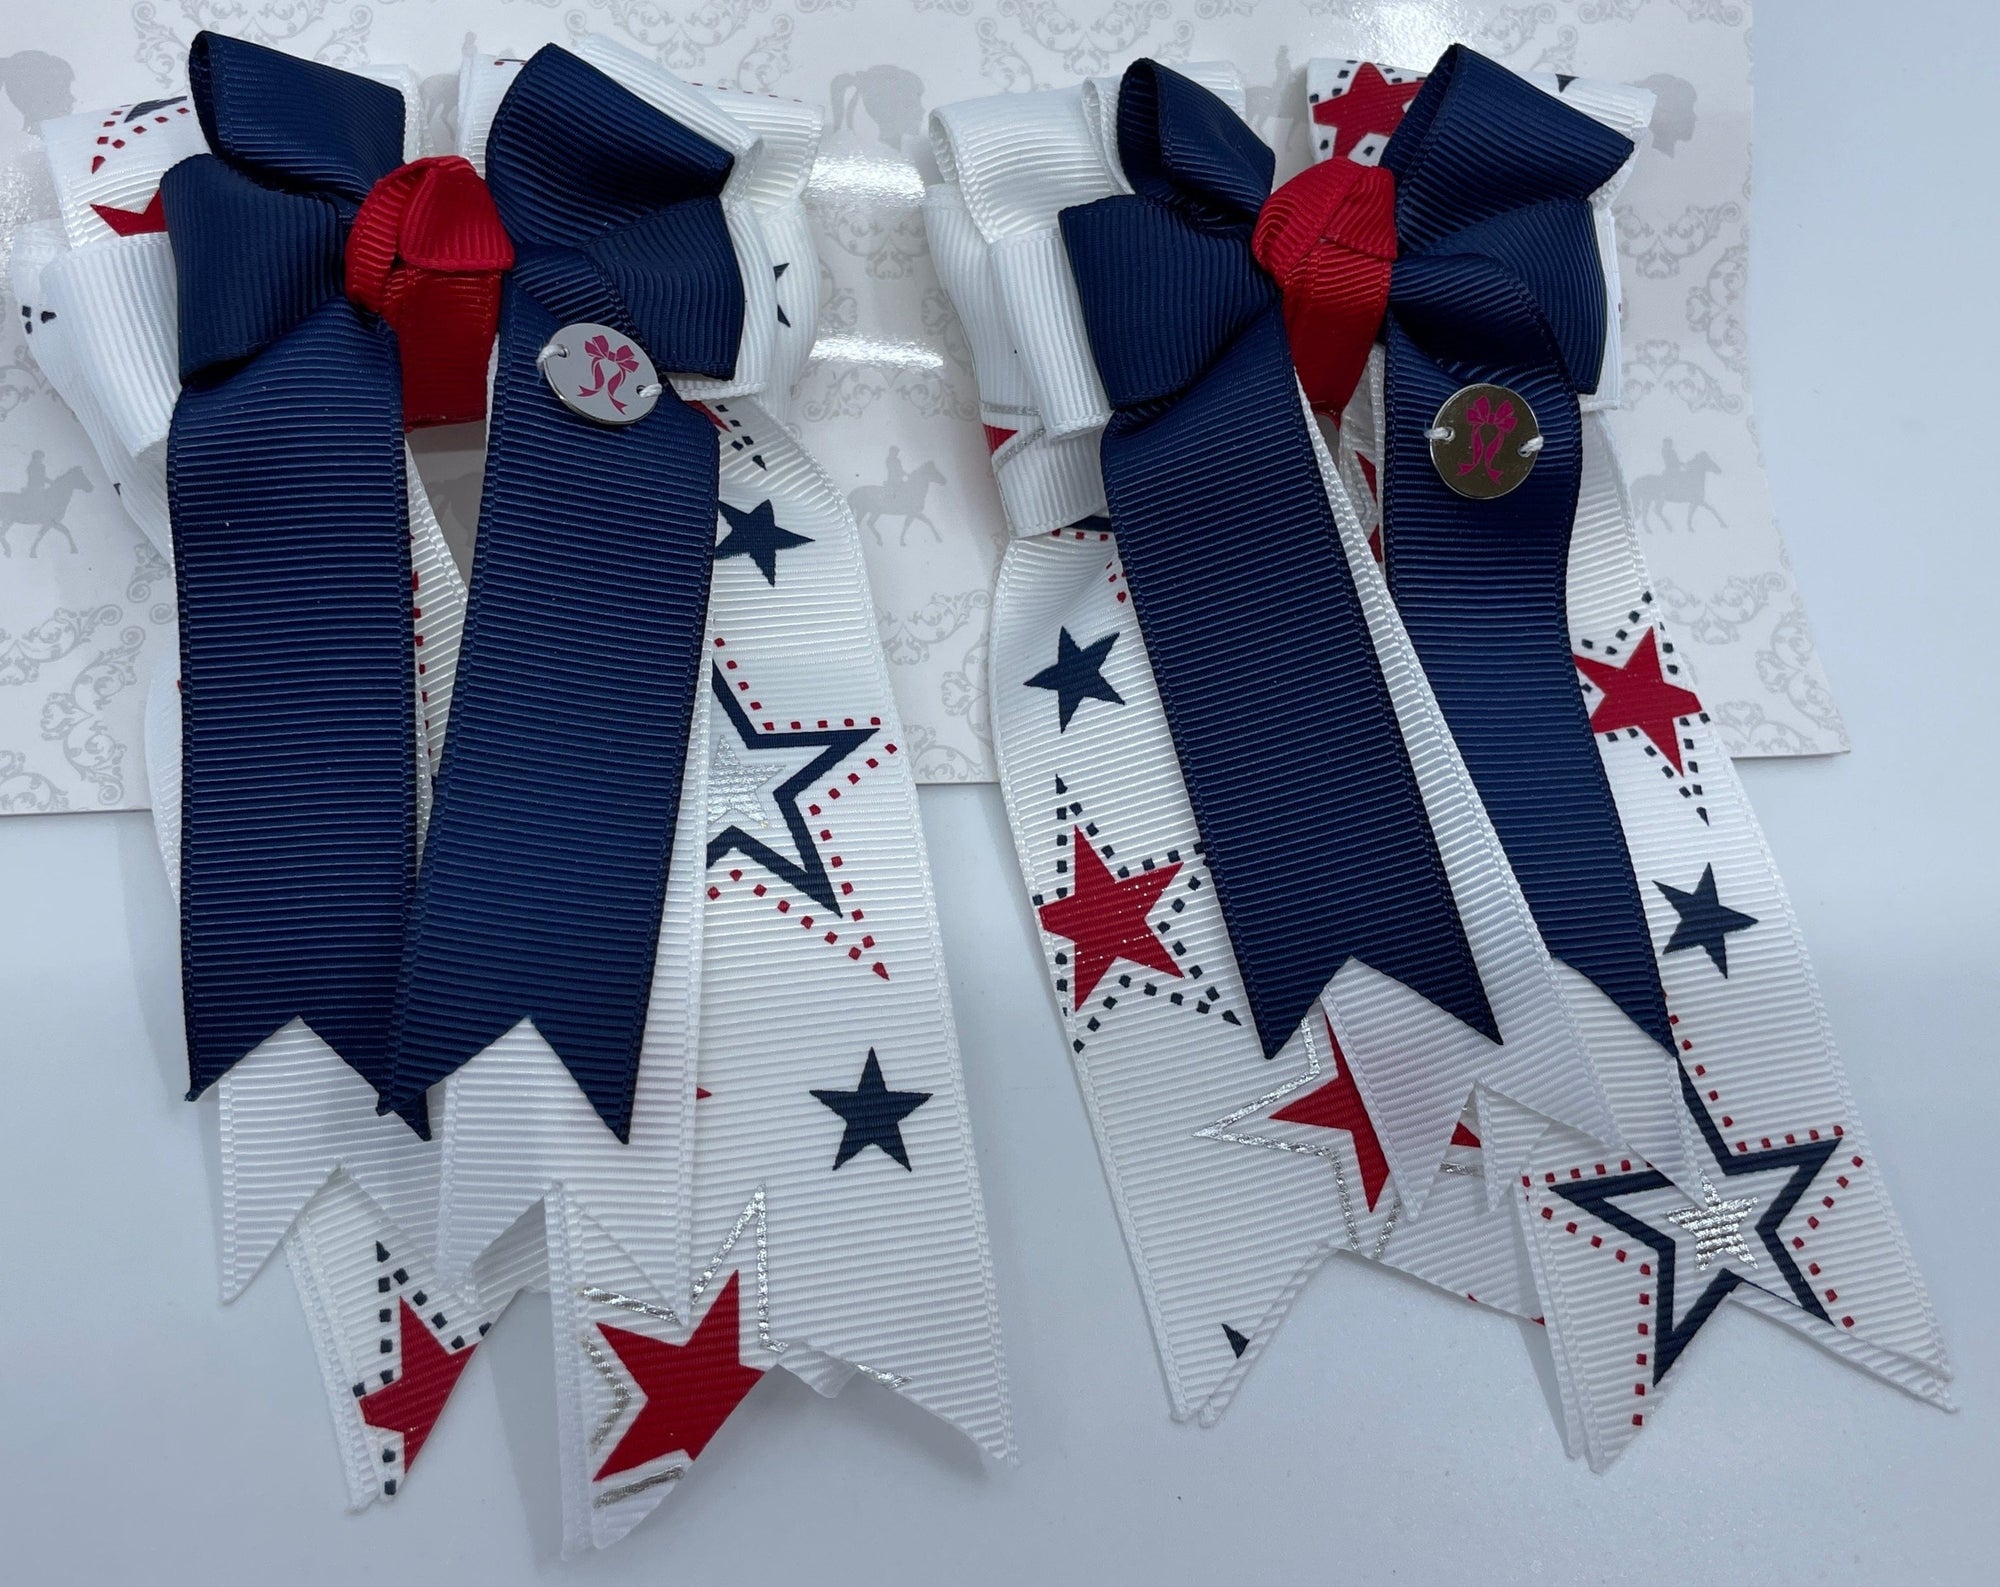 PonyTail Bows 3" Tails Star Spangled PonyTail Bows equestrian team apparel online tack store mobile tack store custom farm apparel custom show stable clothing equestrian lifestyle horse show clothing riding clothes PonyTail Bows | Equestrian Hair Accessories horses equestrian tack store